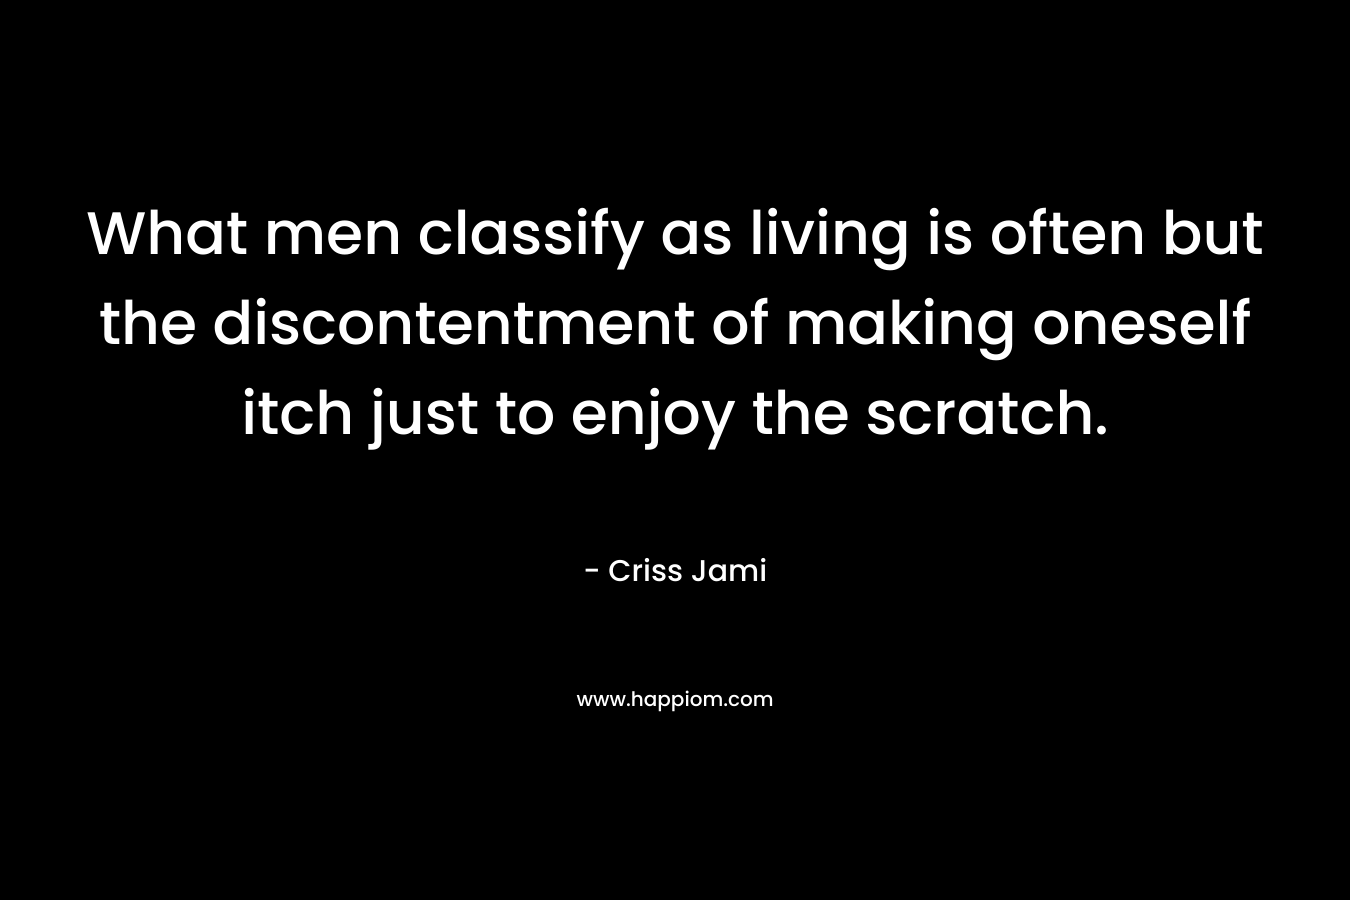 What men classify as living is often but the discontentment of making oneself itch just to enjoy the scratch. – Criss Jami